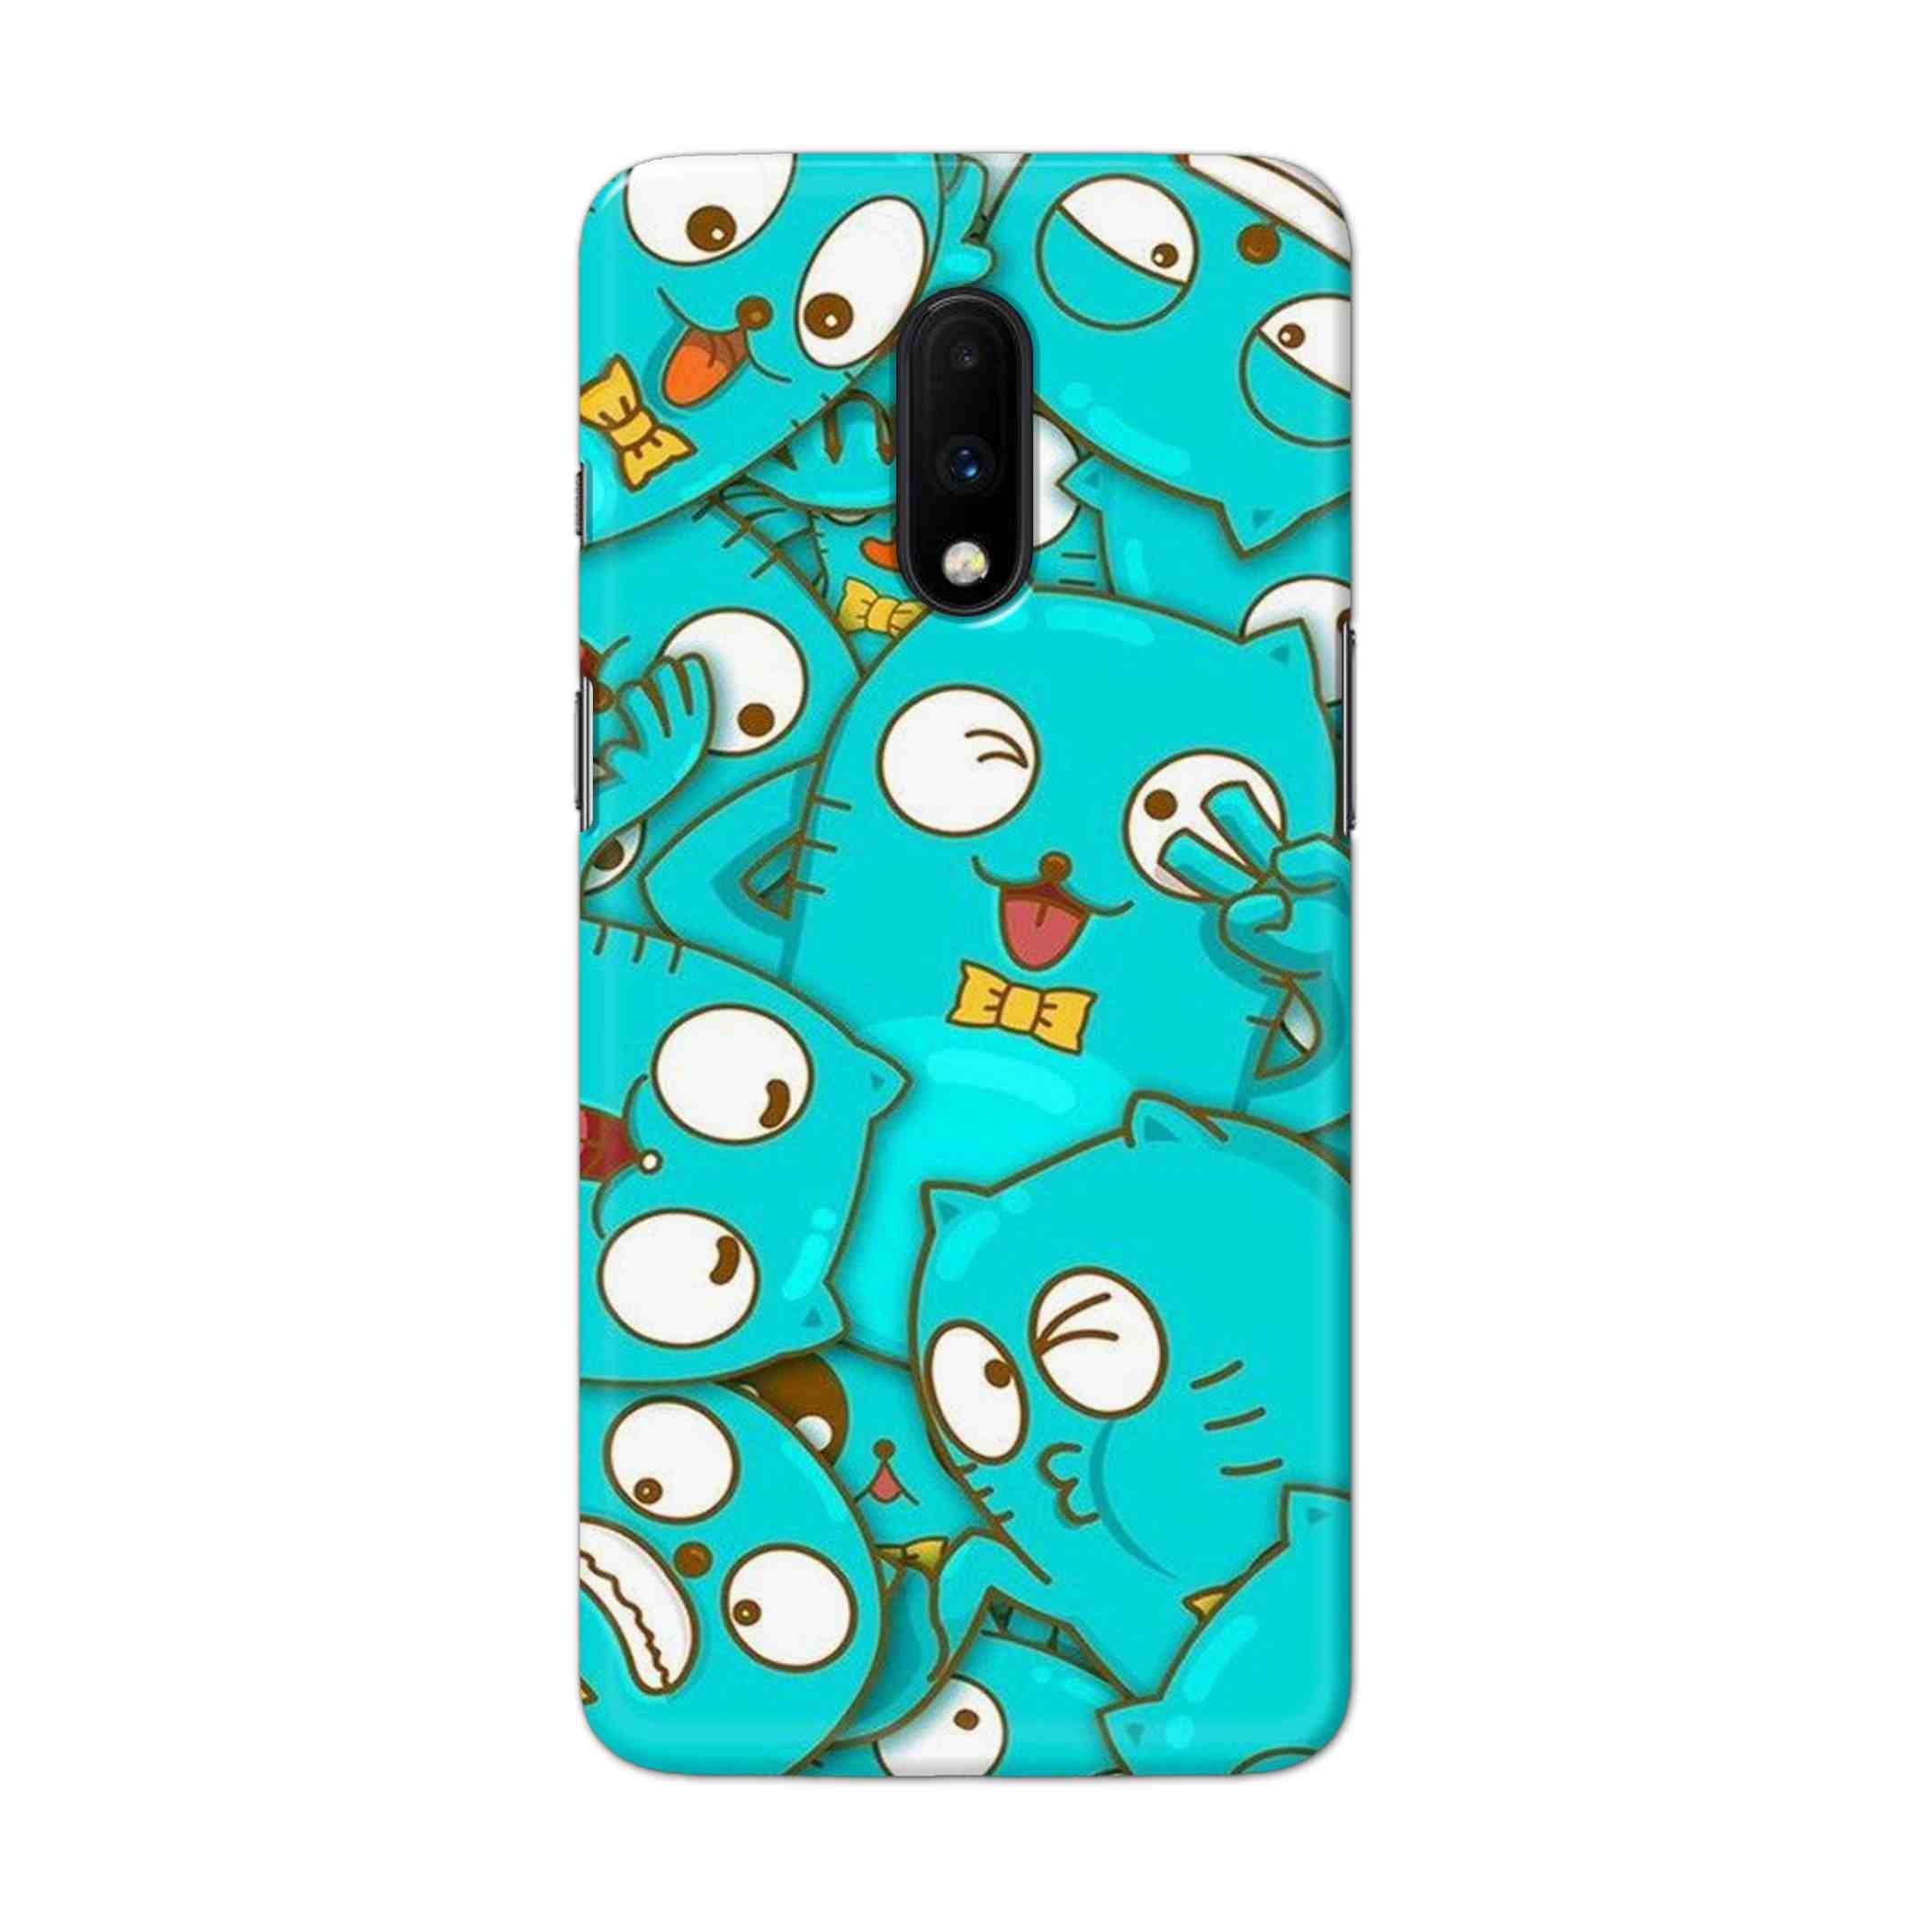 Buy Cat Hard Back Mobile Phone Case Cover For OnePlus 7 Online